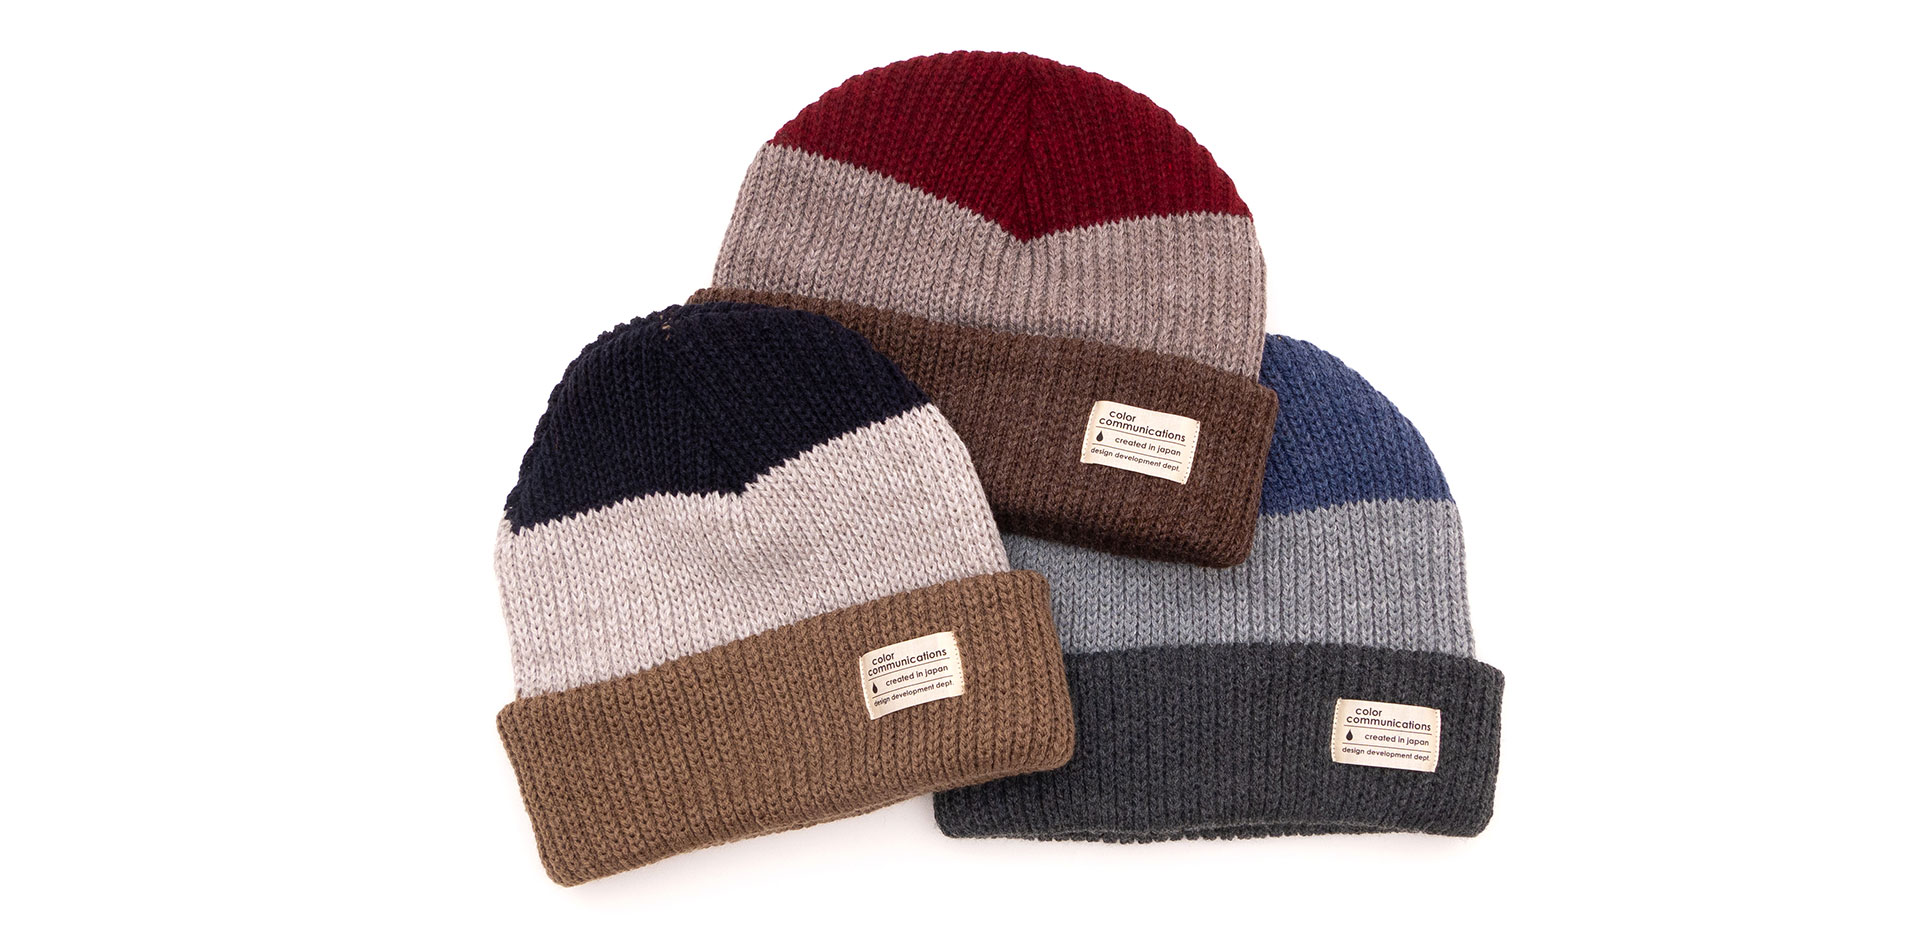 color communications（カラーコミュニケーションズ）knitcap / cotton tag 3 tone cuff